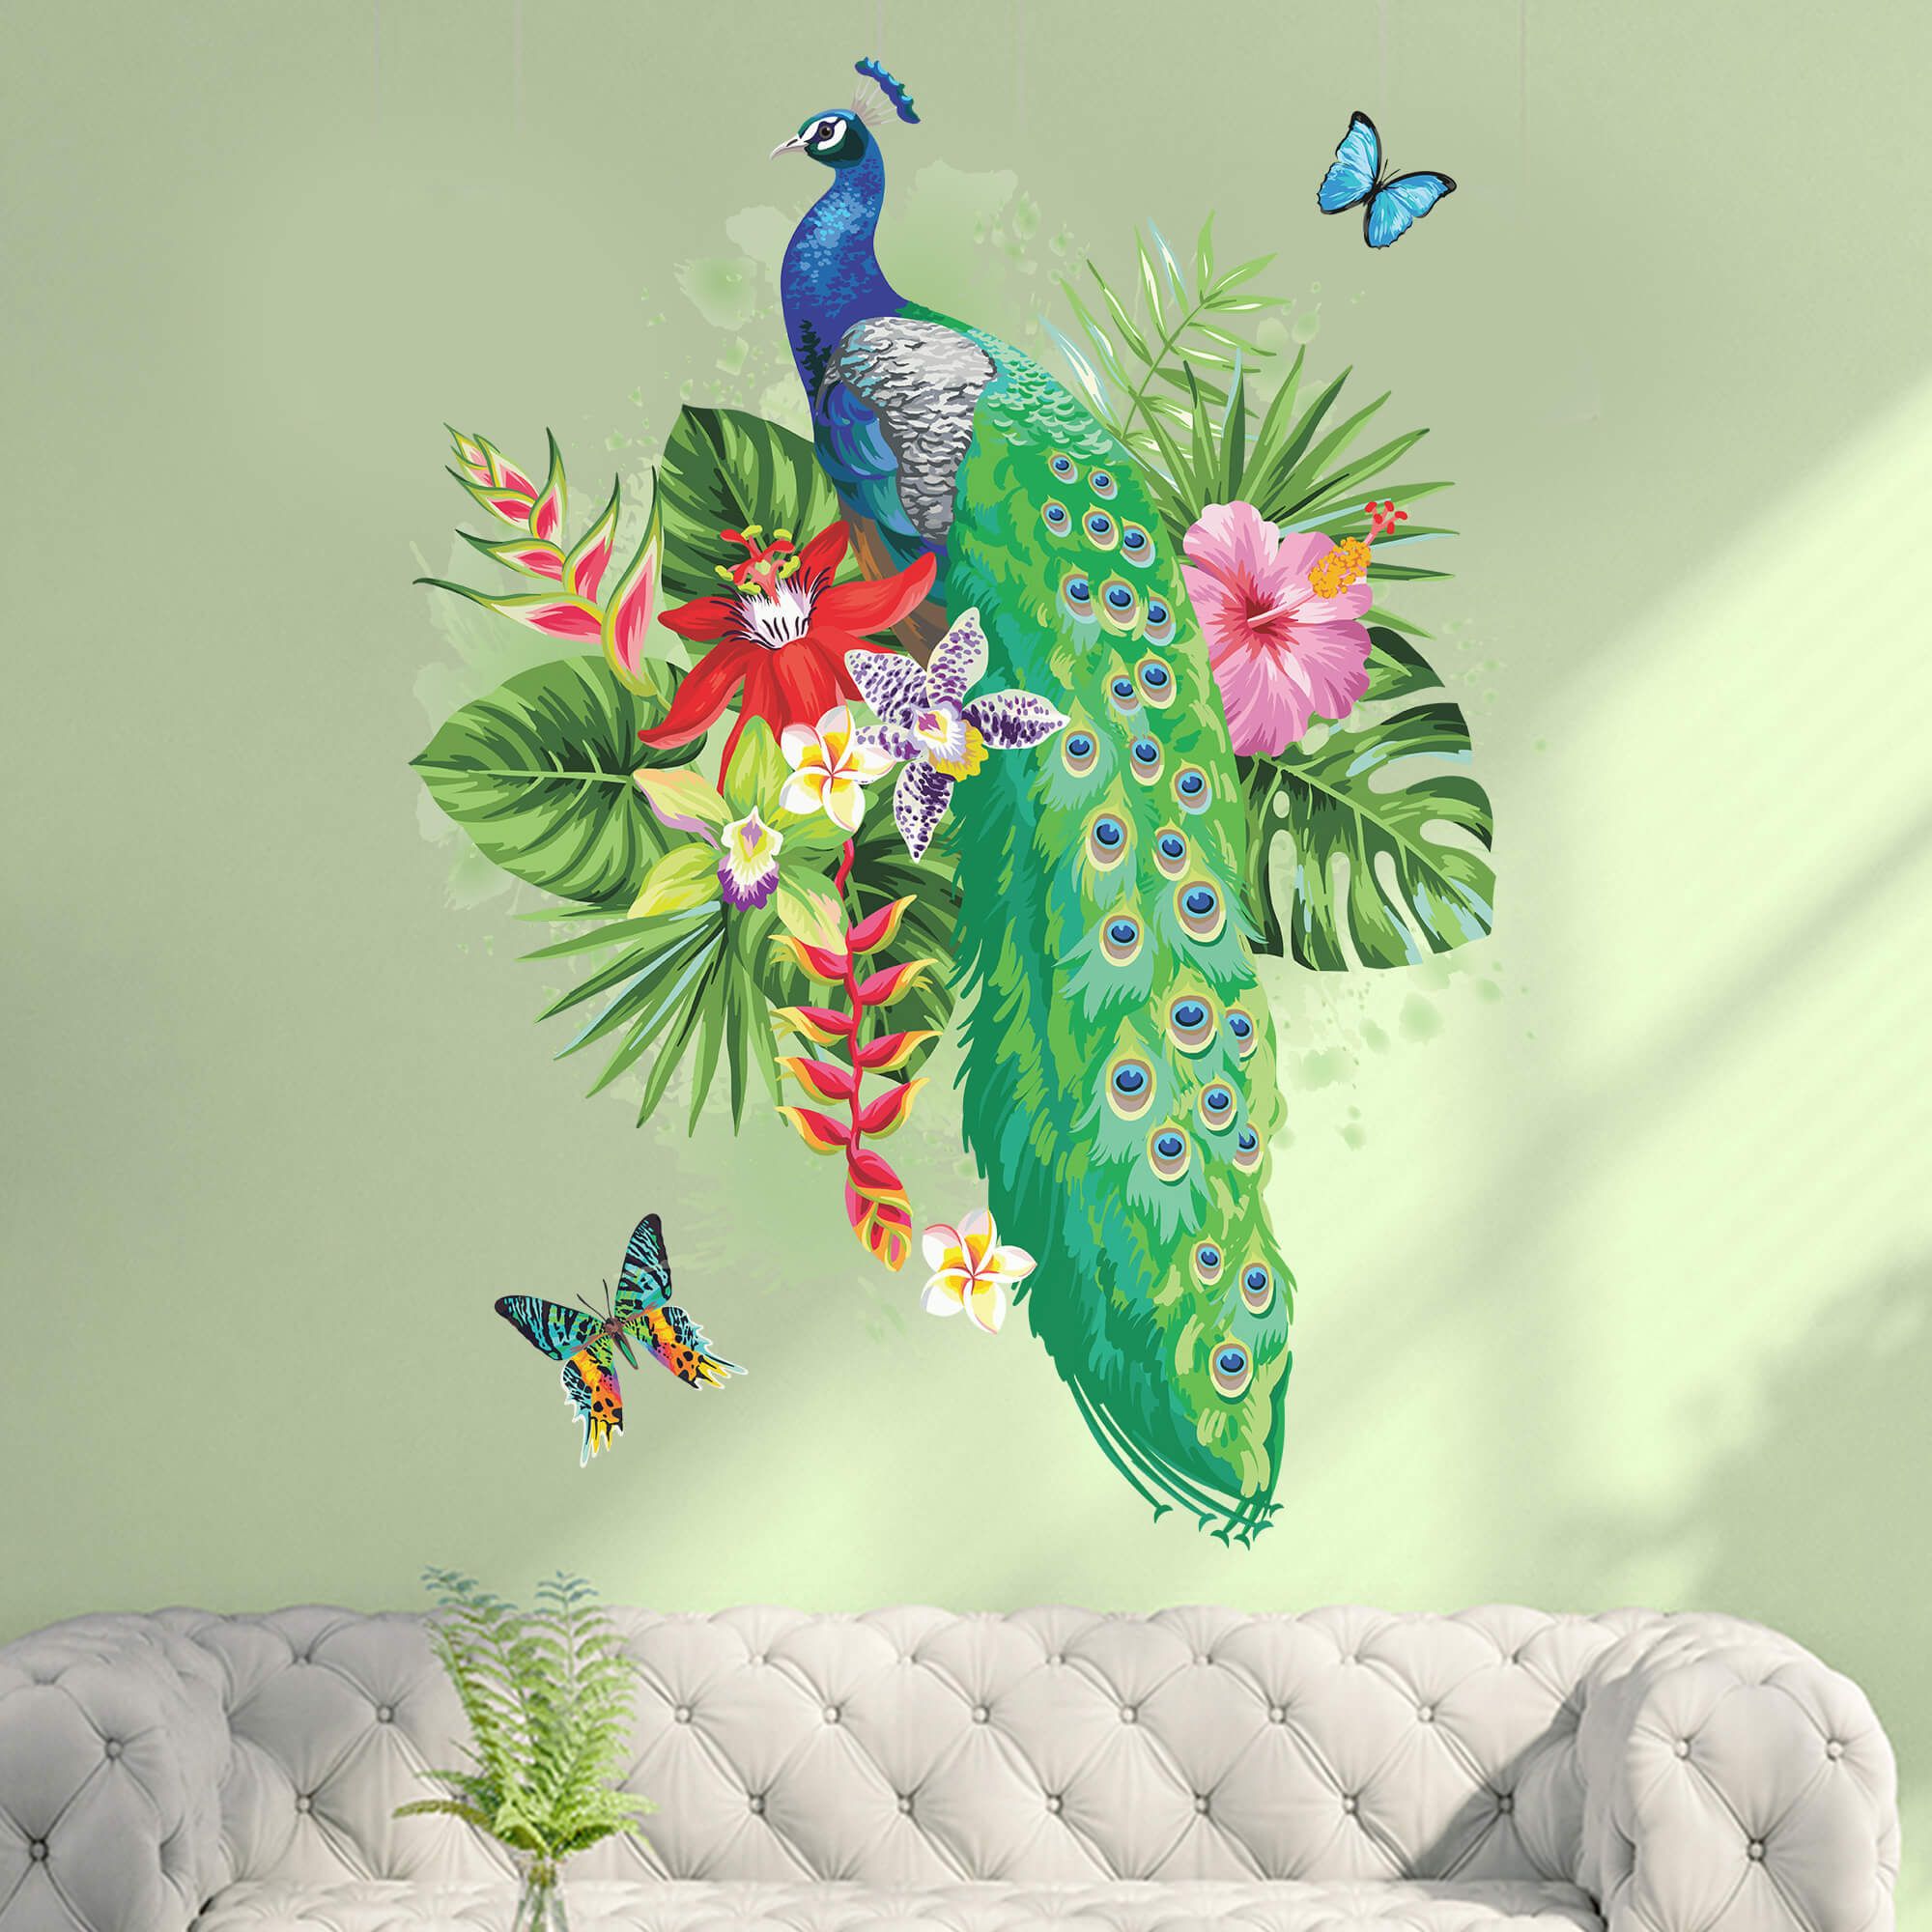 Magnificence of a Peacock - Wall Stickers & Decals by Asian Paints